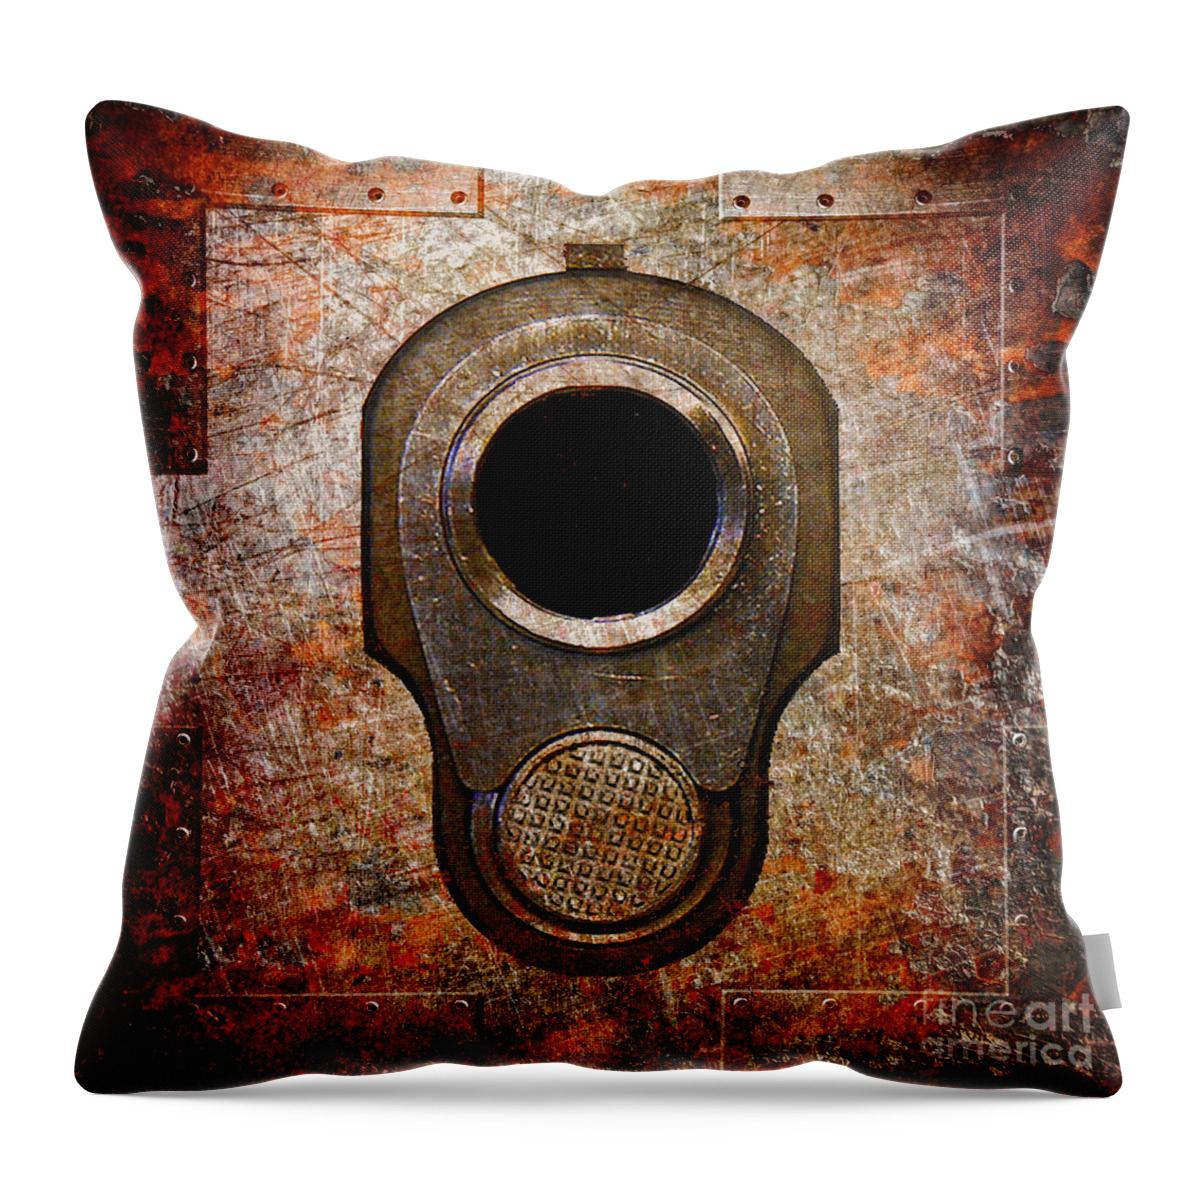 Colt Throw Pillow featuring the digital art M1911 Muzzle on Rusted Riveted Metal by Fred Ber